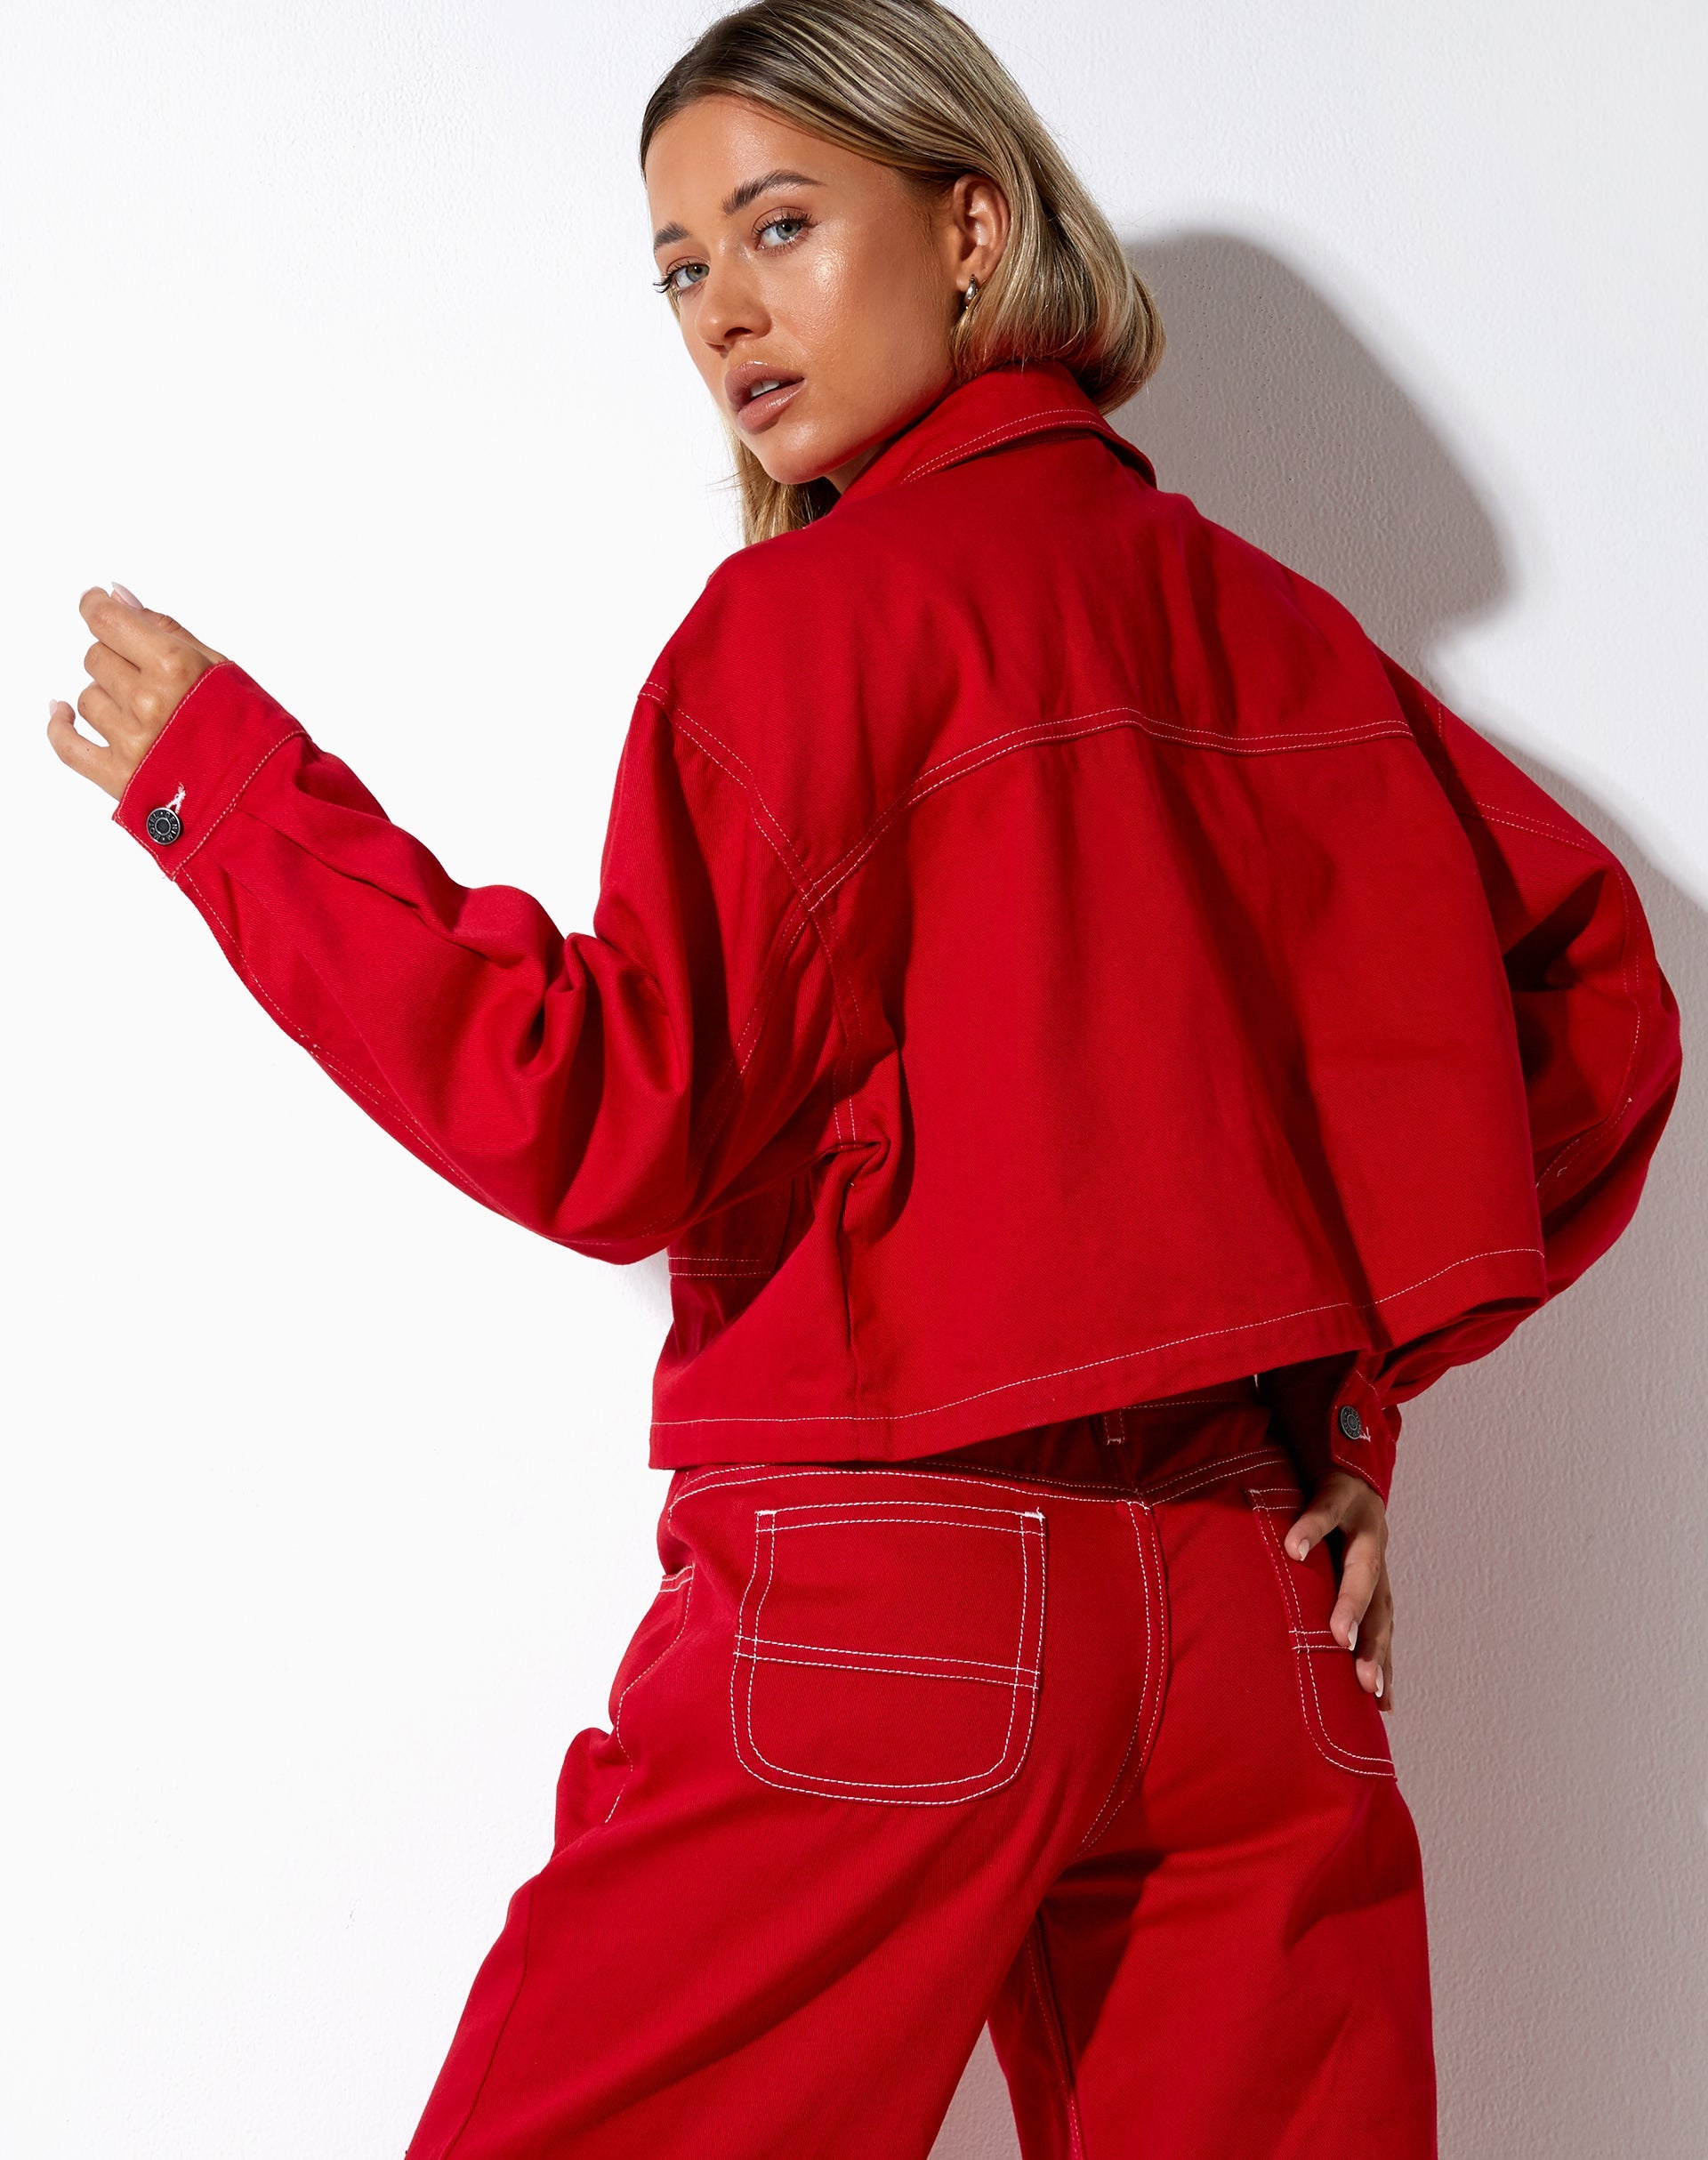 image of Boxy Denim Jacket in Racing Red with White Stitch